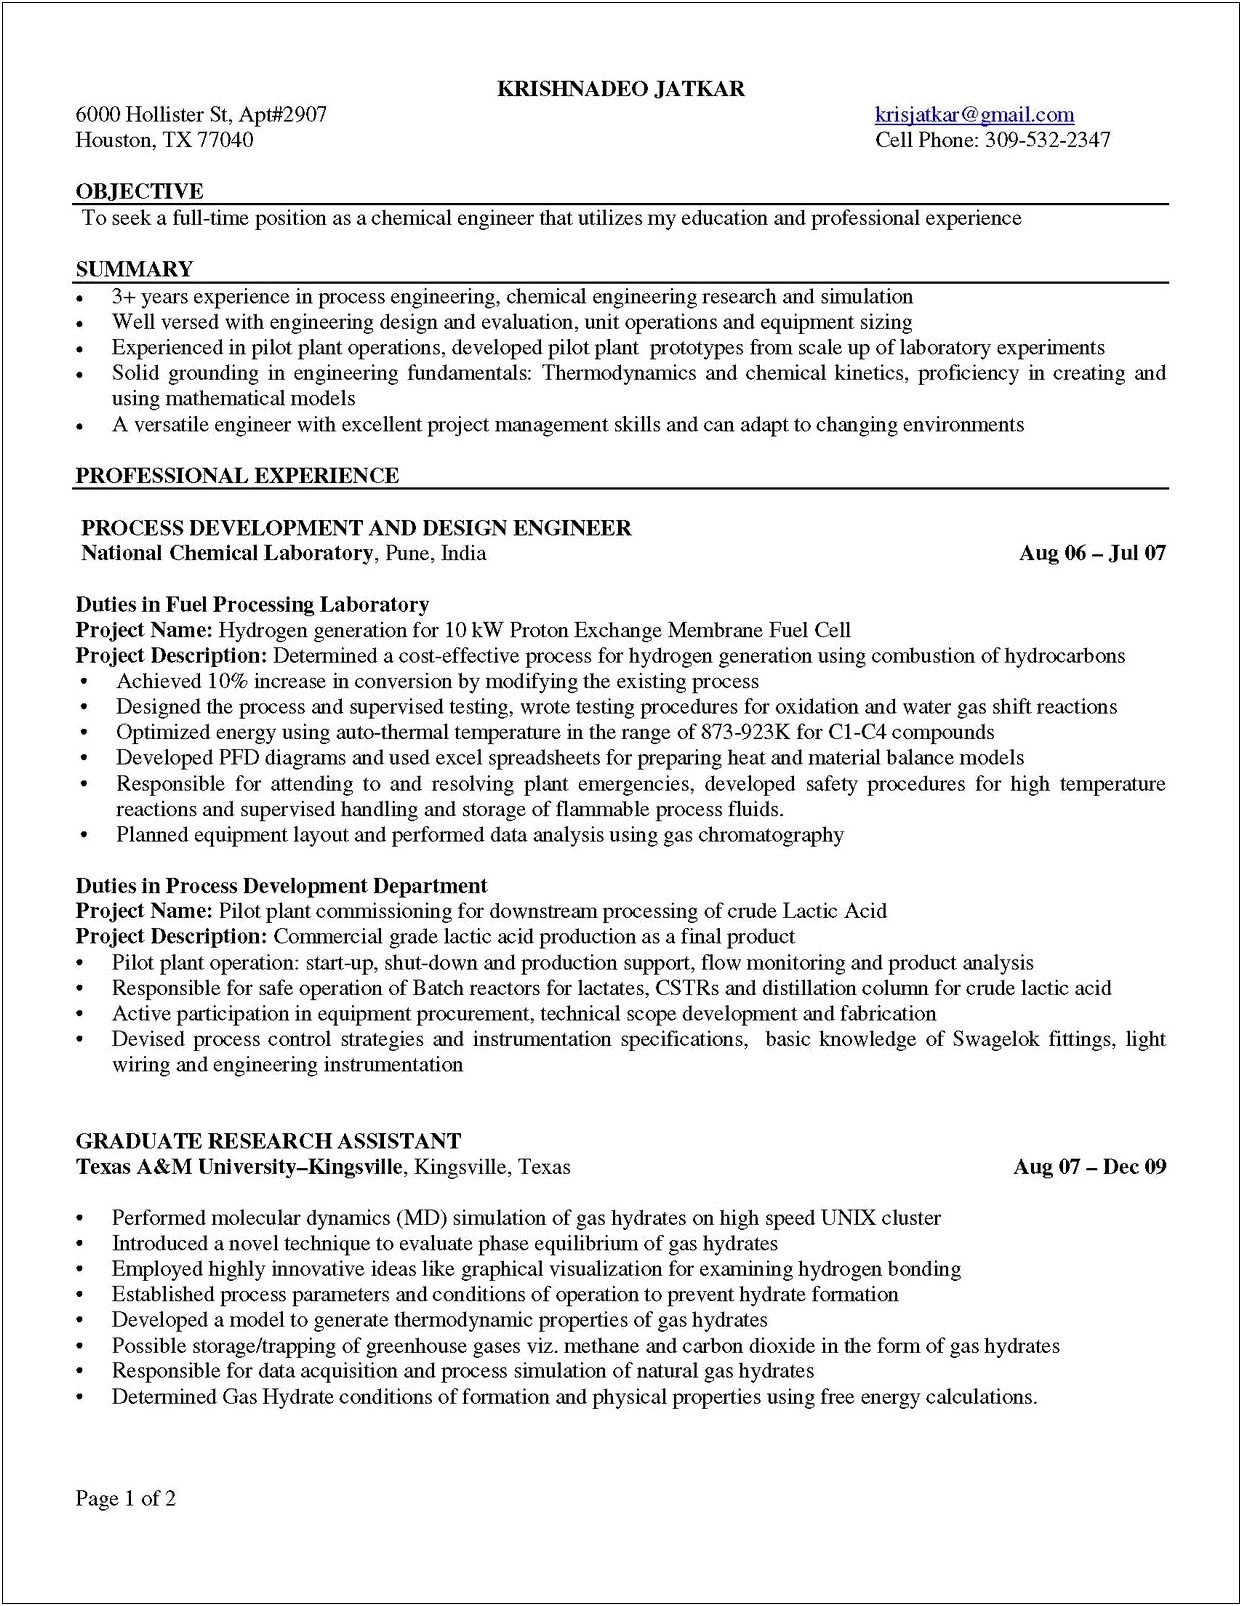 Career Objective For Chemical Engineer Resume